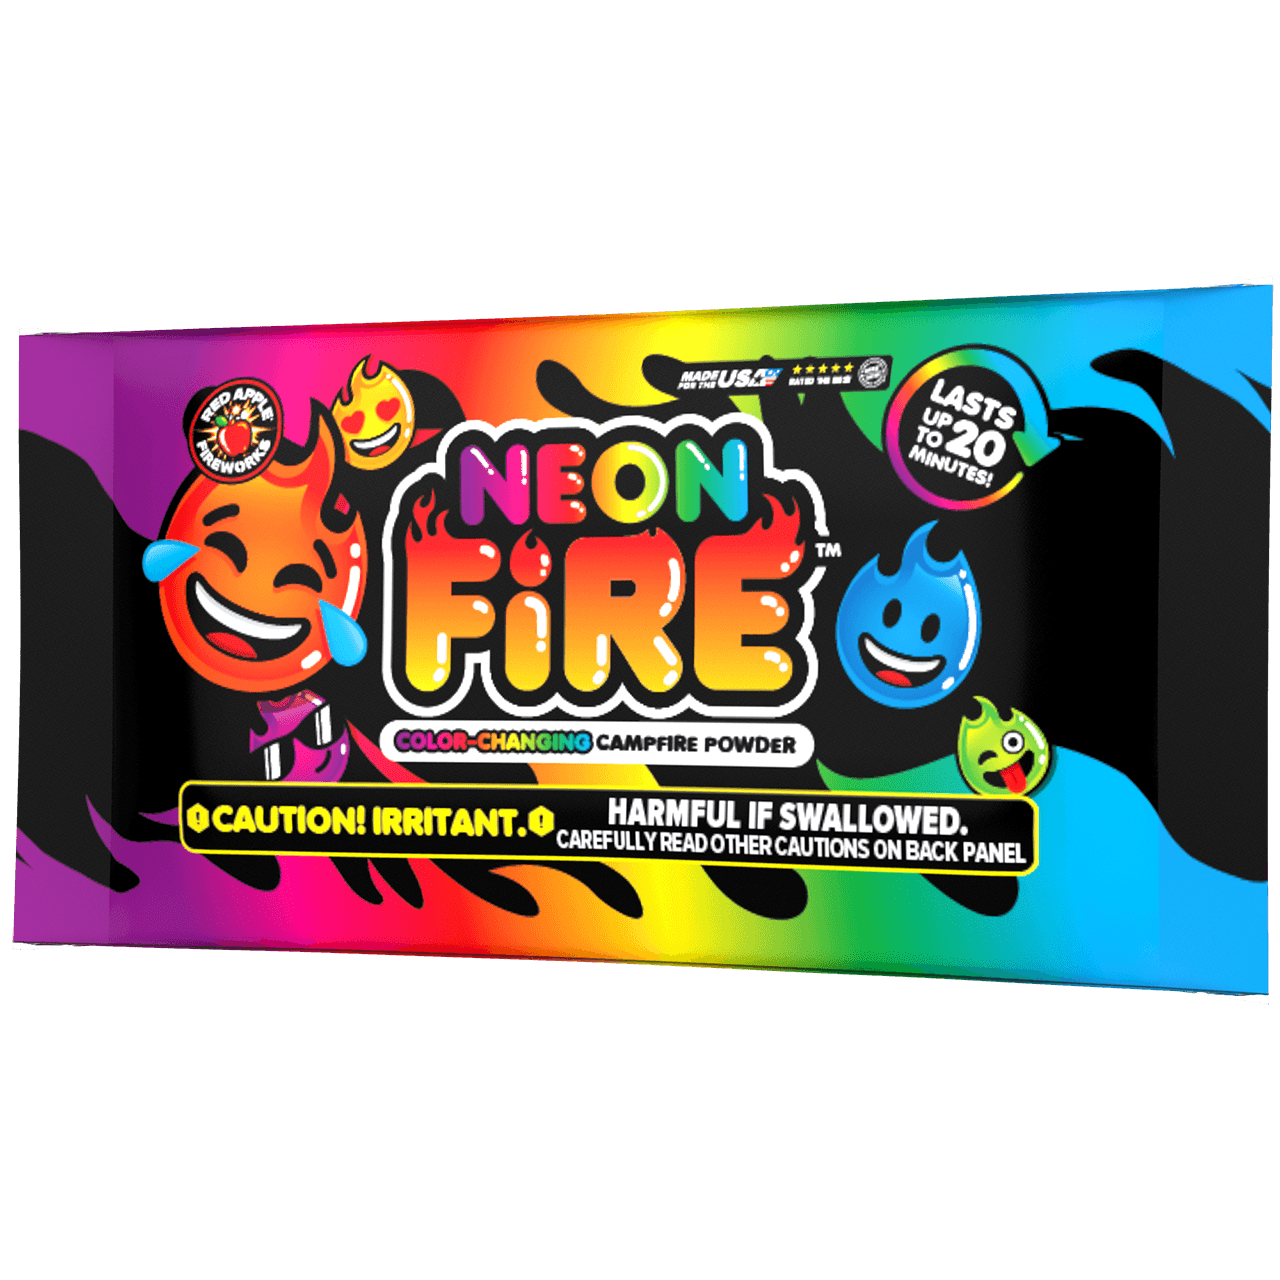 Neon Fire™ Color-Changing Campfire Powder